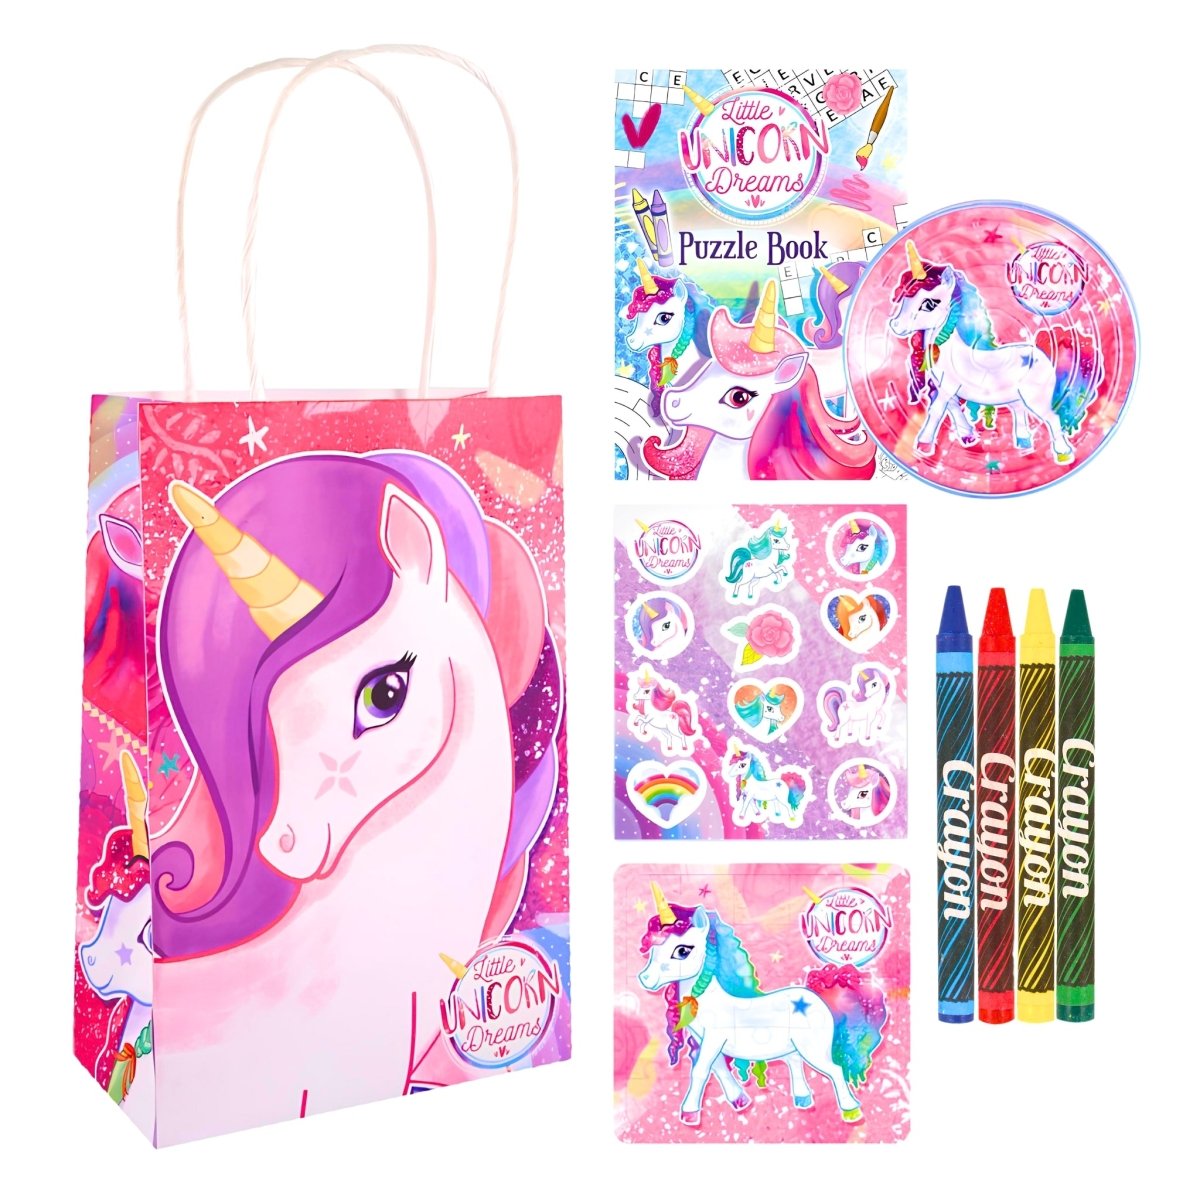 Unicorn Pre-Filled Party Bags - Kids Party Craft